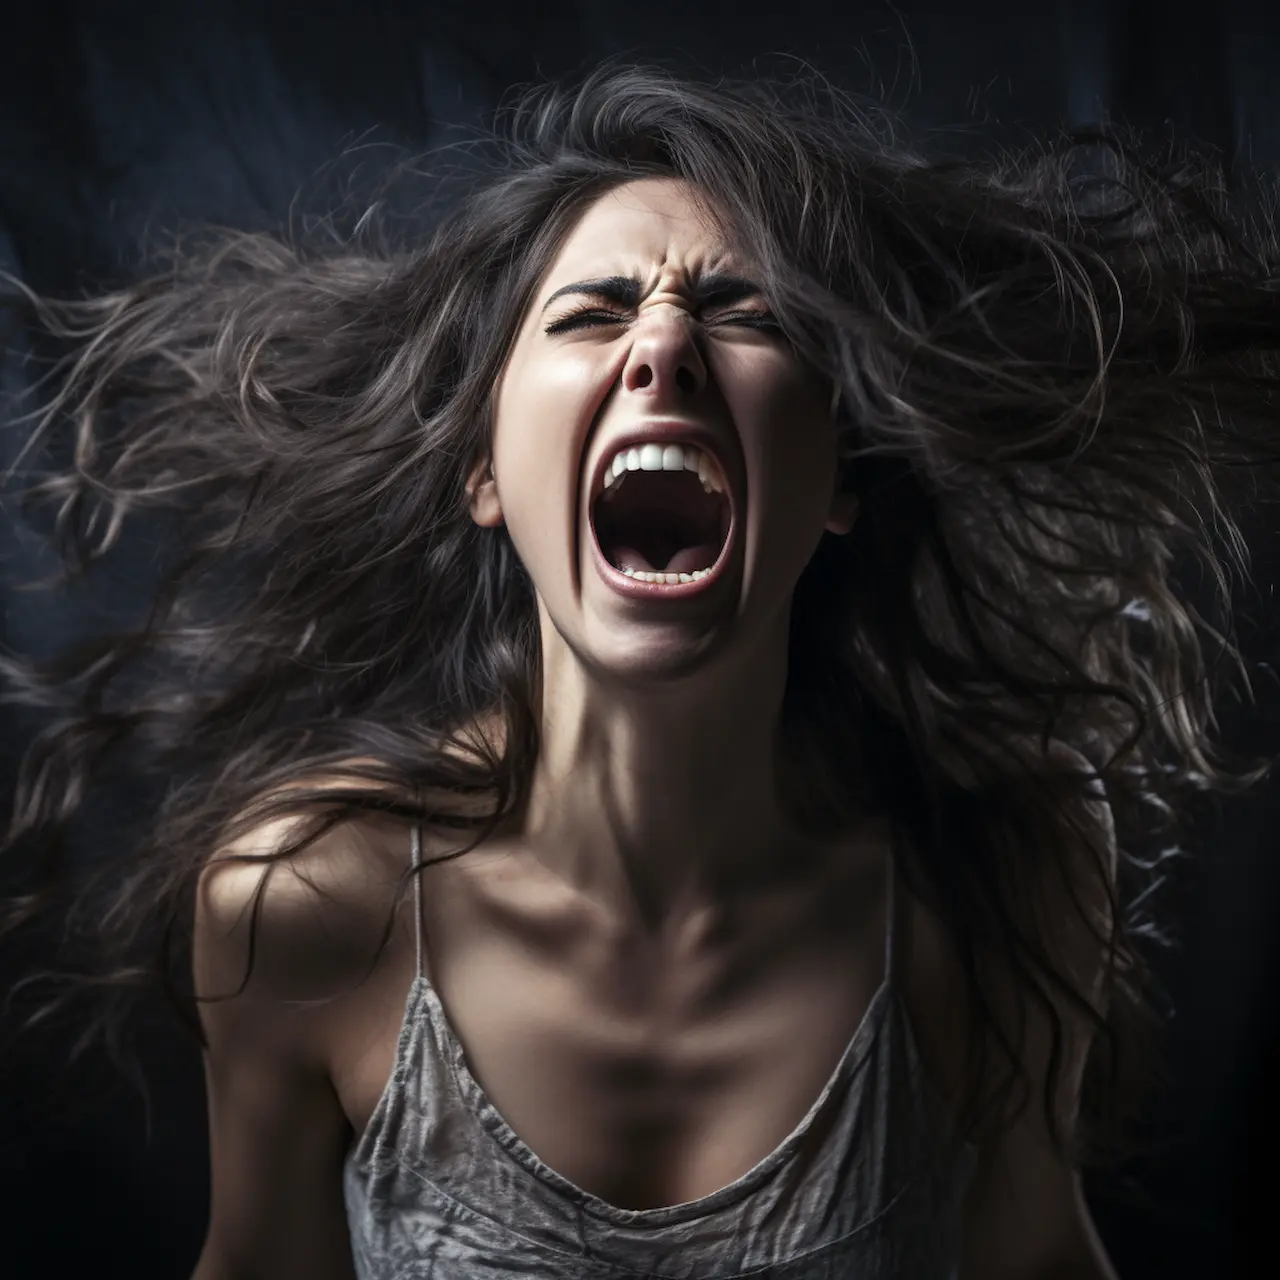 Sometimes you just need to scream to survive divorce, rebuild your life and move forward.